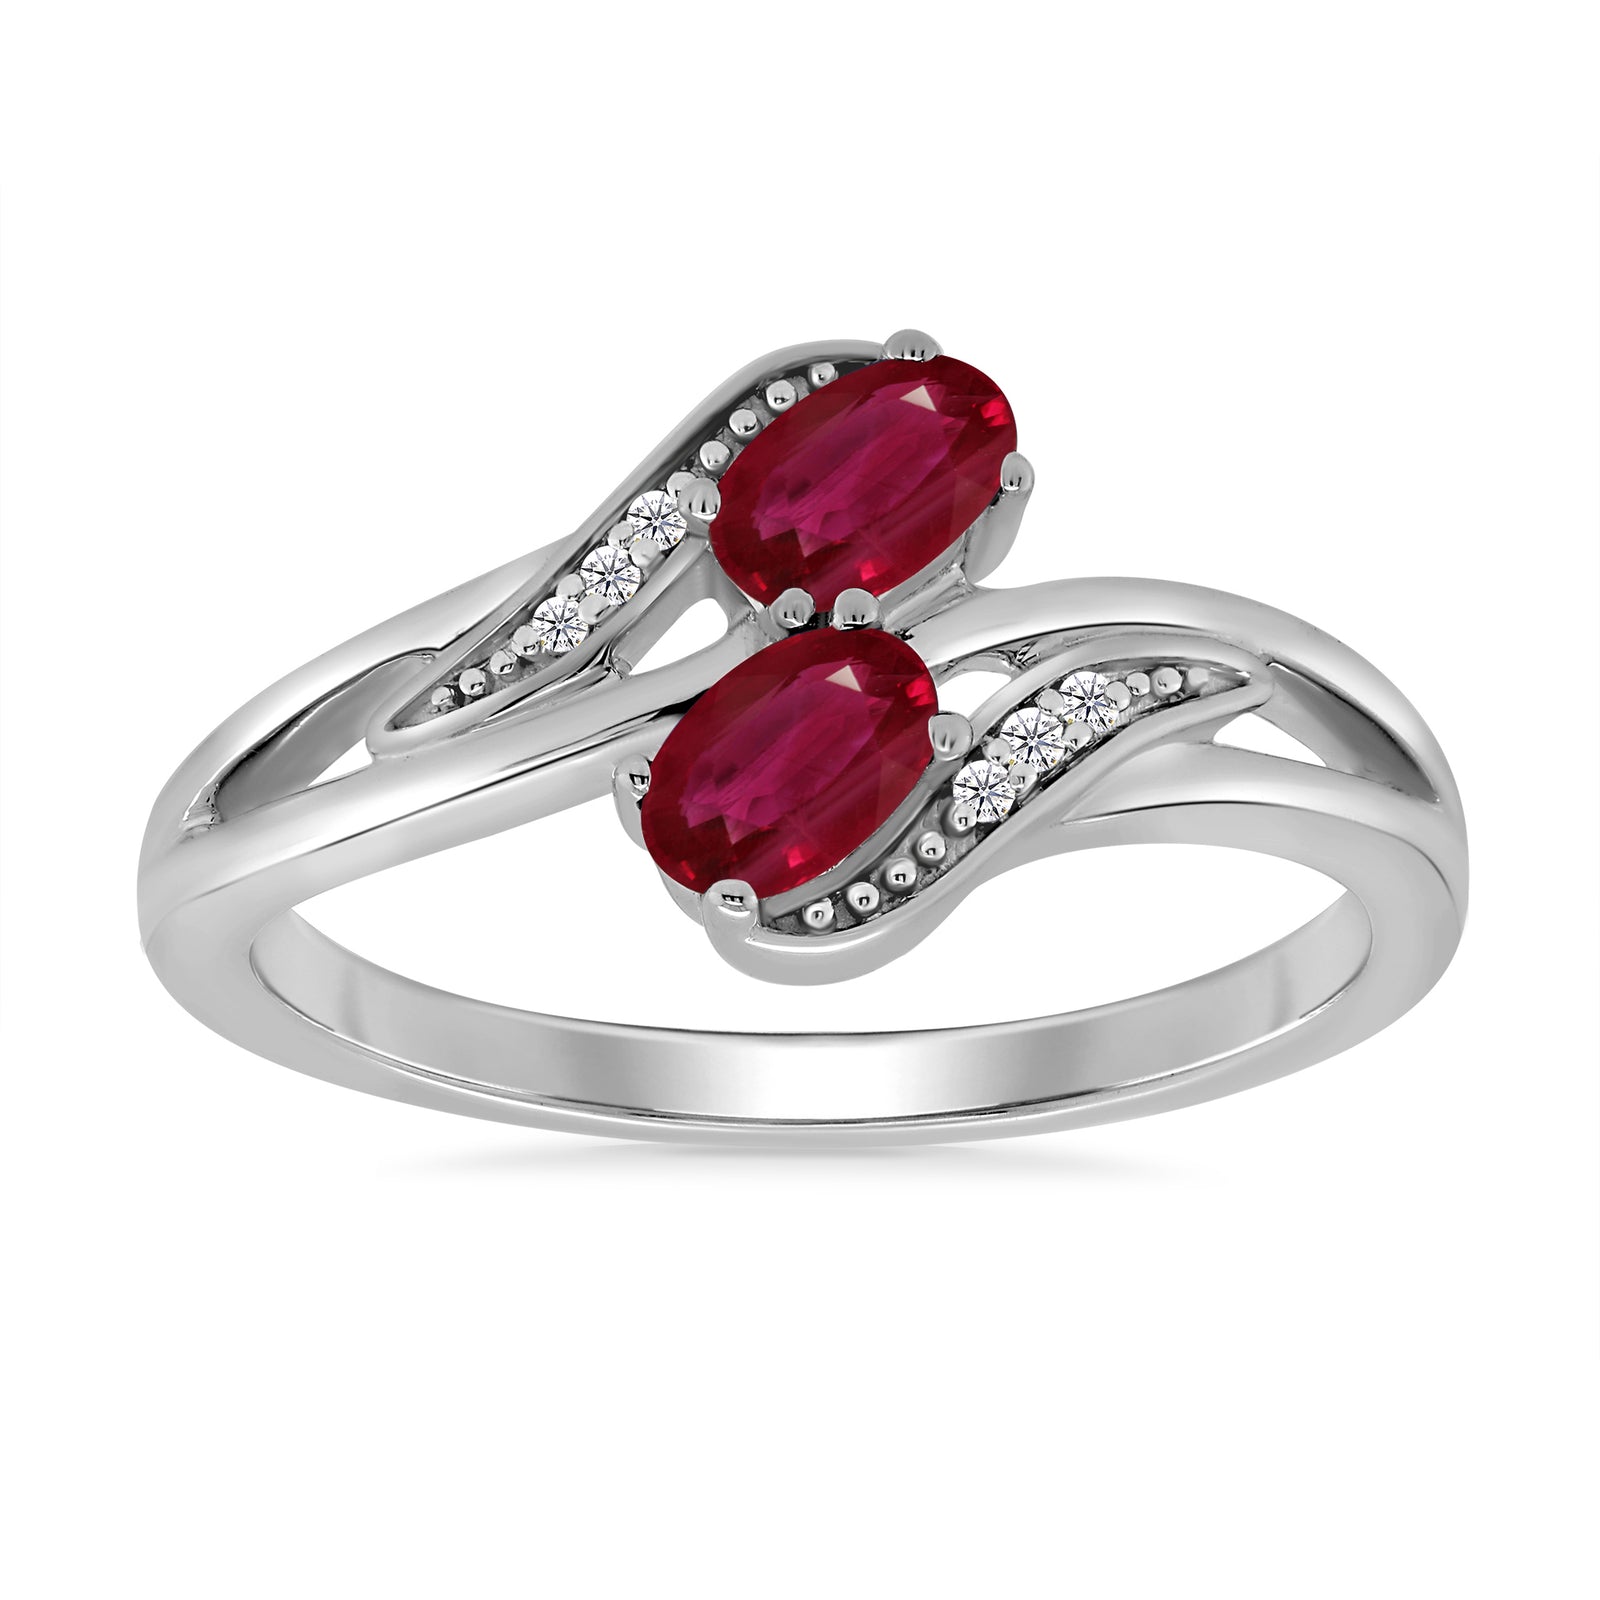 9ct white gold 5x3mm oval rubies & diamond cross over ring 0.02ct